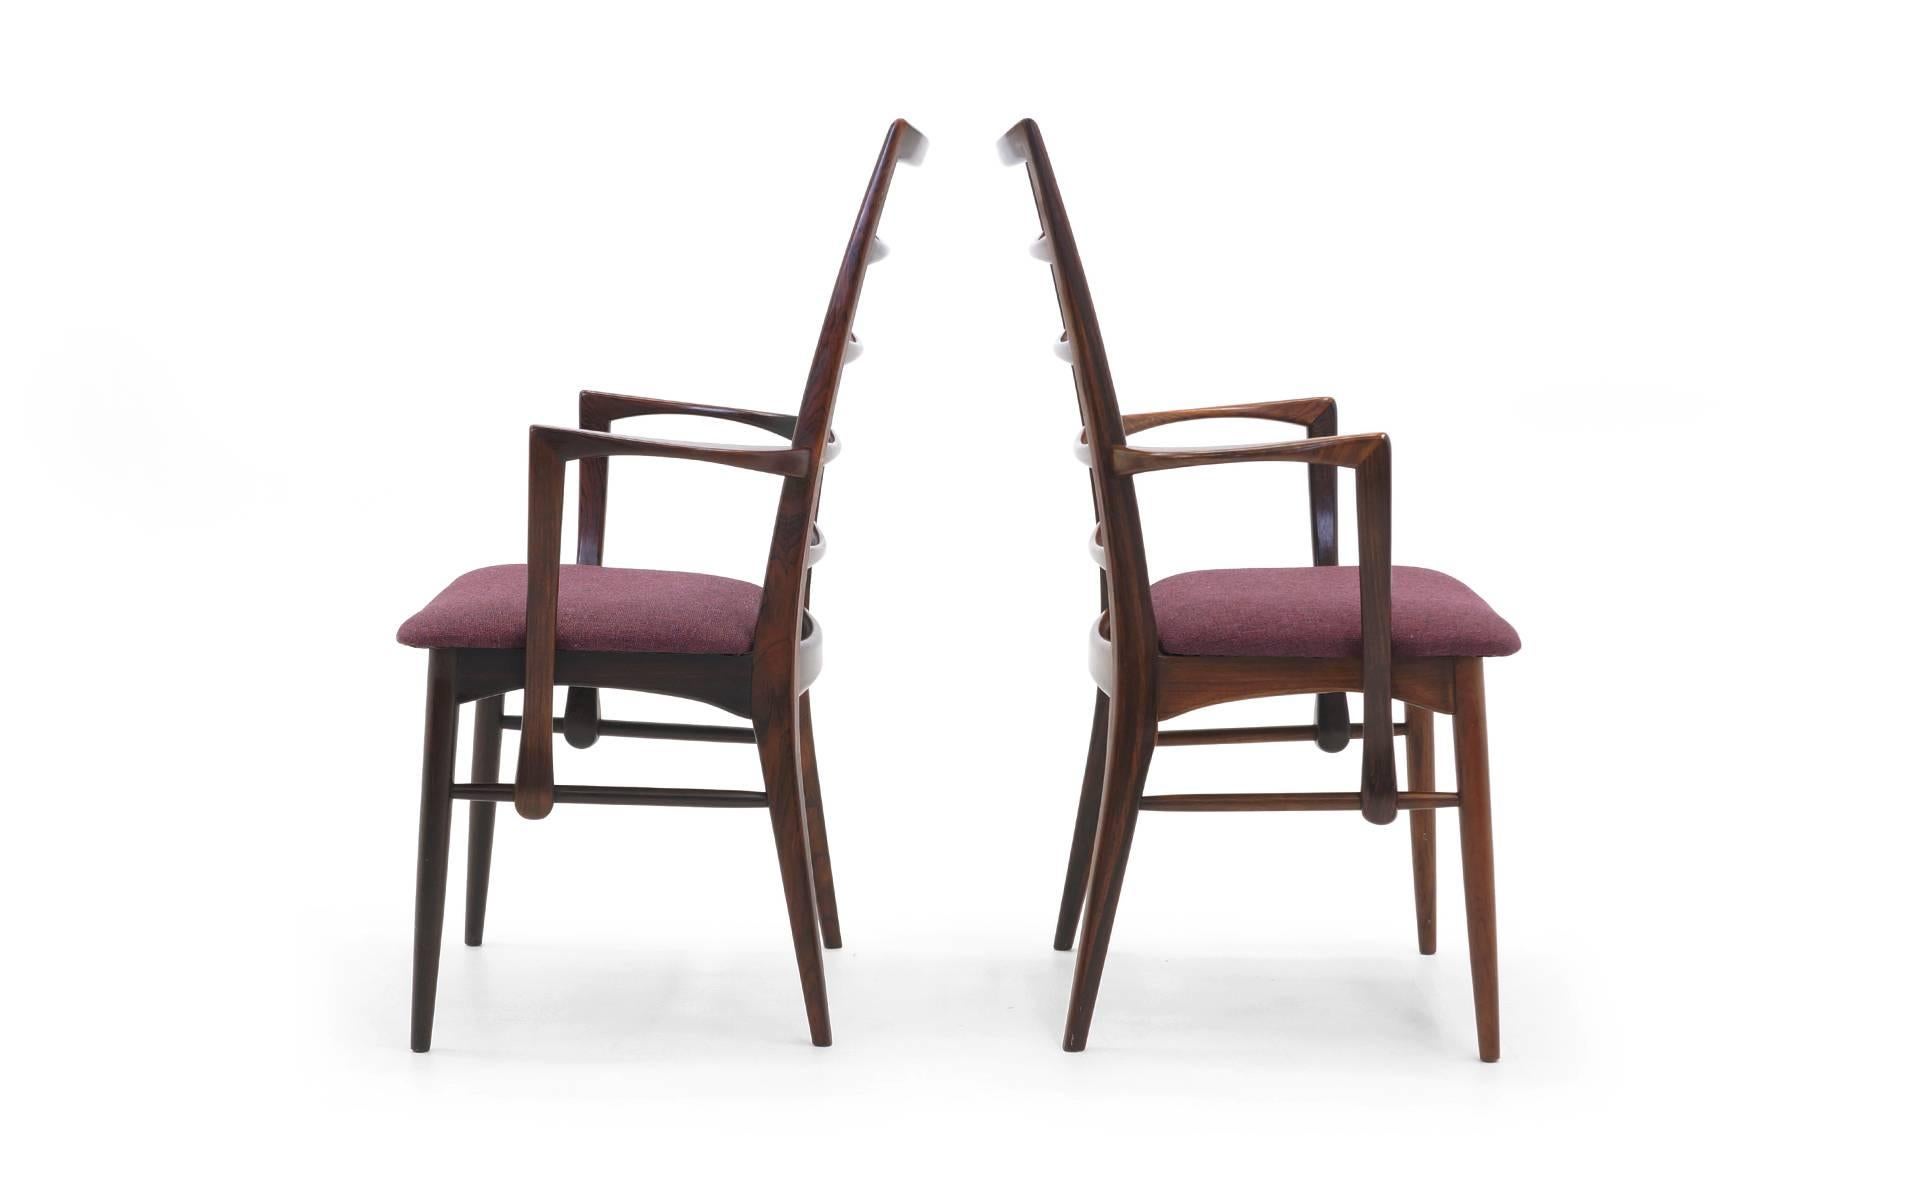 Pair of rosewood dining or side chairs designed by Niels Koefoed. Great set to add as captions chairs to an existing set of dining chairs. Rosewood is excellent. Fabric is good, but will likely want to update.